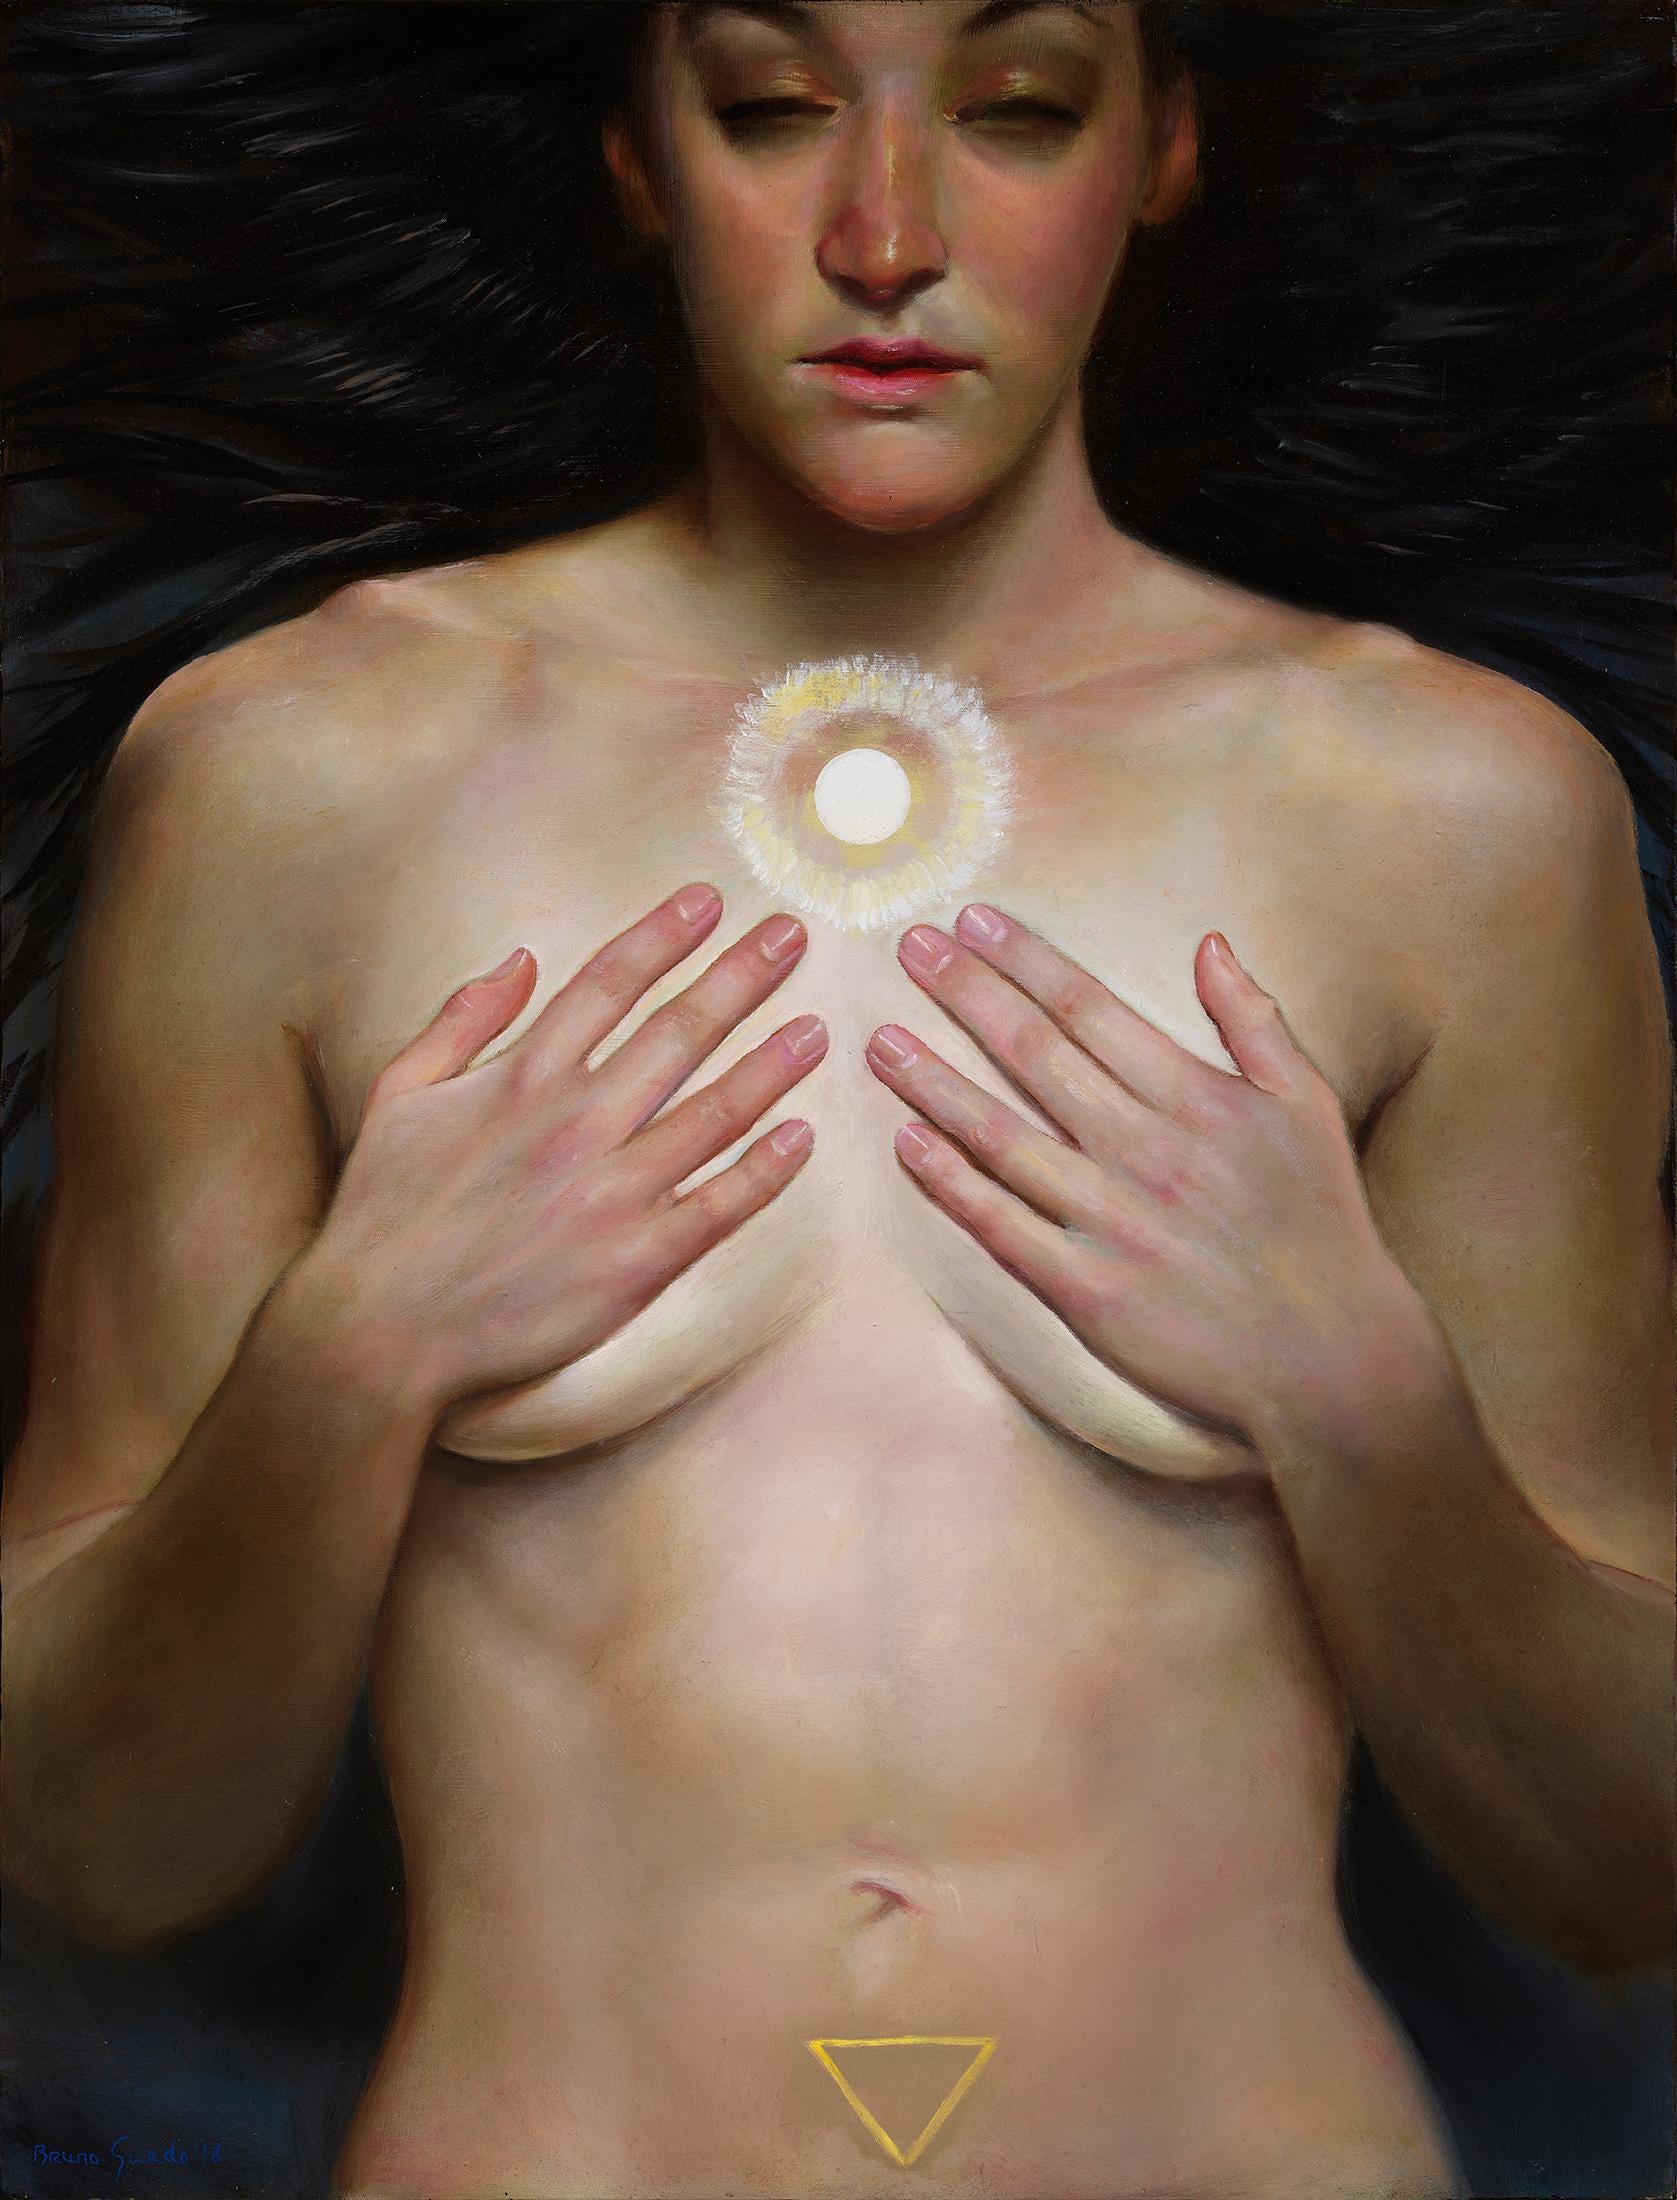 Bruno Surdo Nude Painting - The Oracle, Nude Female with Hands Covering Her Breasts, Long Dark Hair